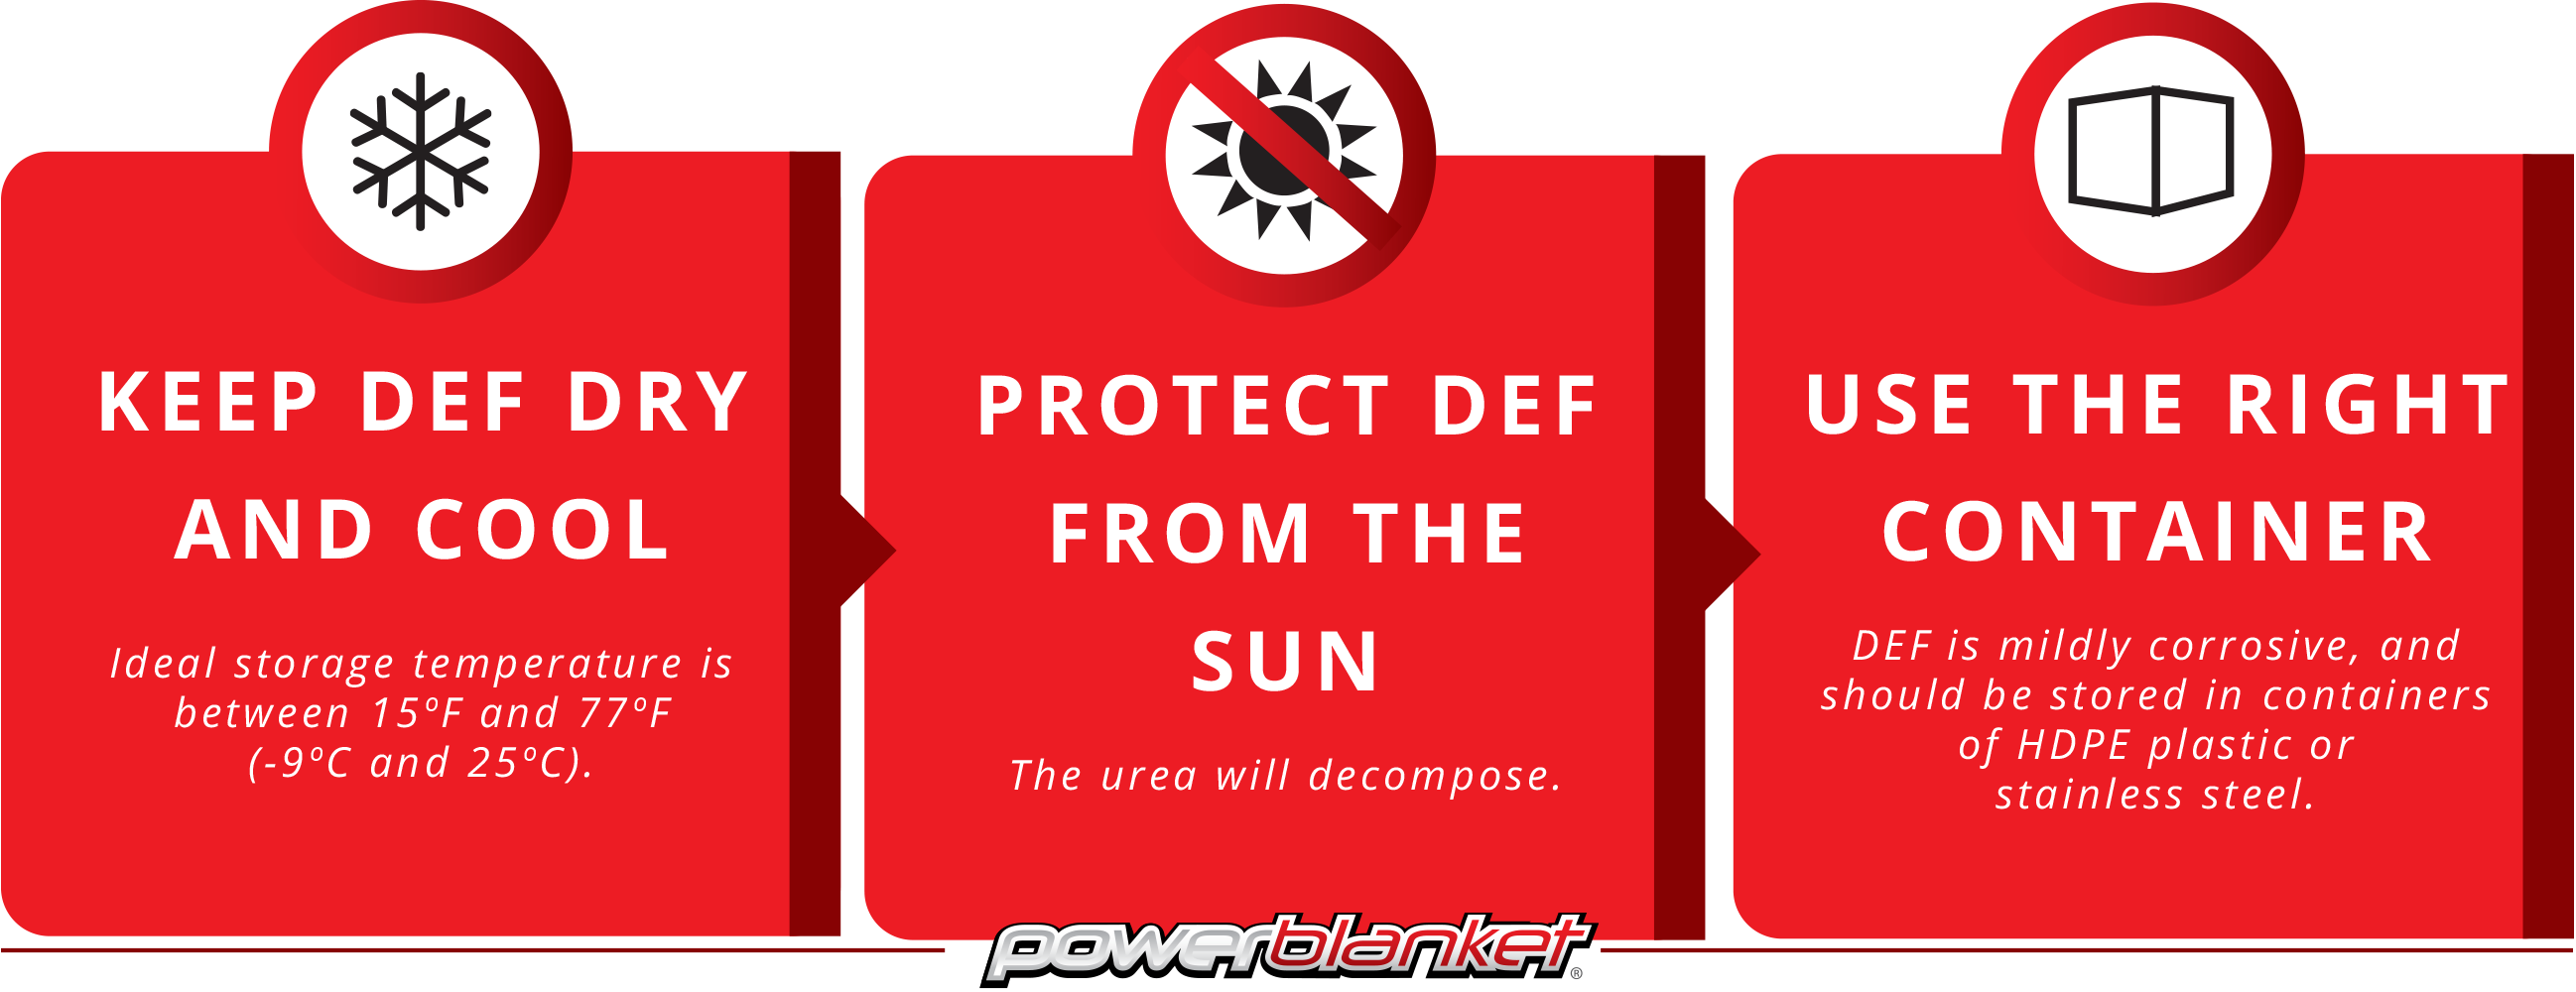 DEF Freezing Protection guide graphic